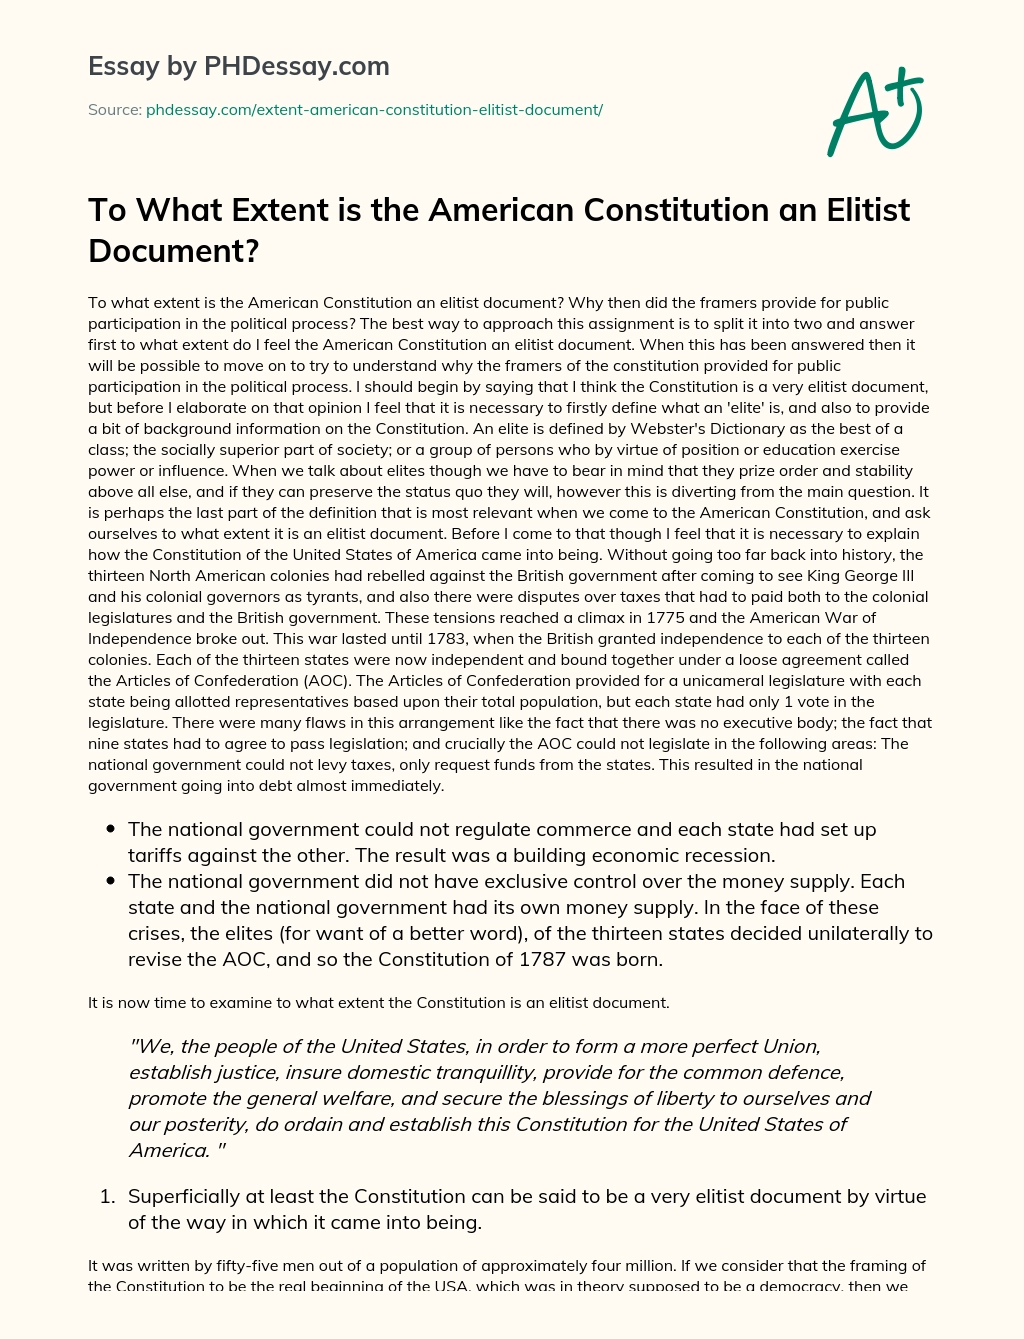 To What Extent is the American Constitution an Elitist Document? essay